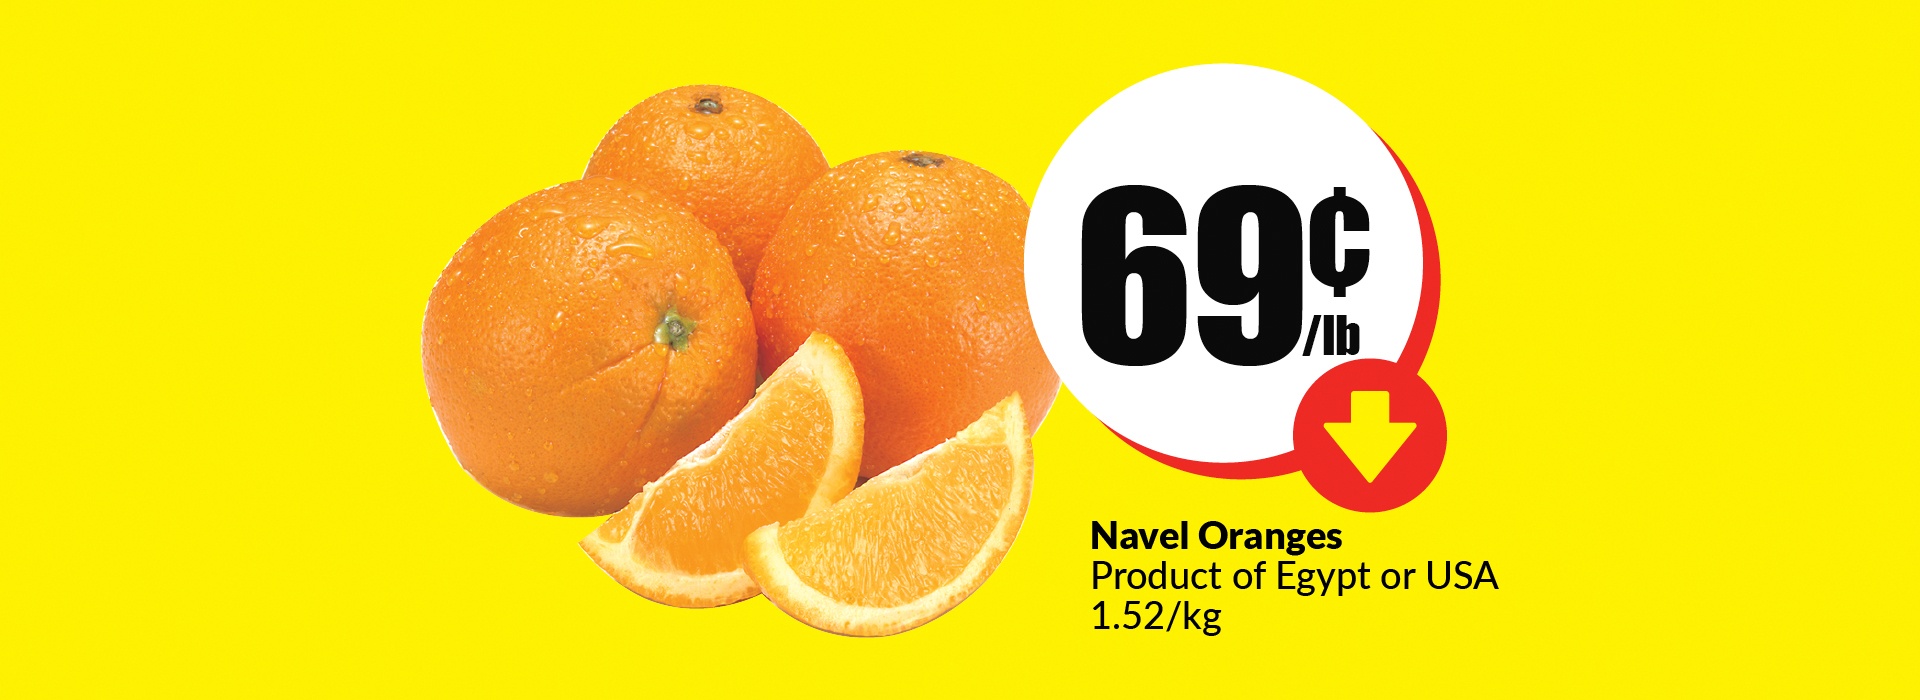 The following image contains the text, " Navel Oranges product of Egypt or USA 1.52/kg. Get them at just 69 cents/lb.